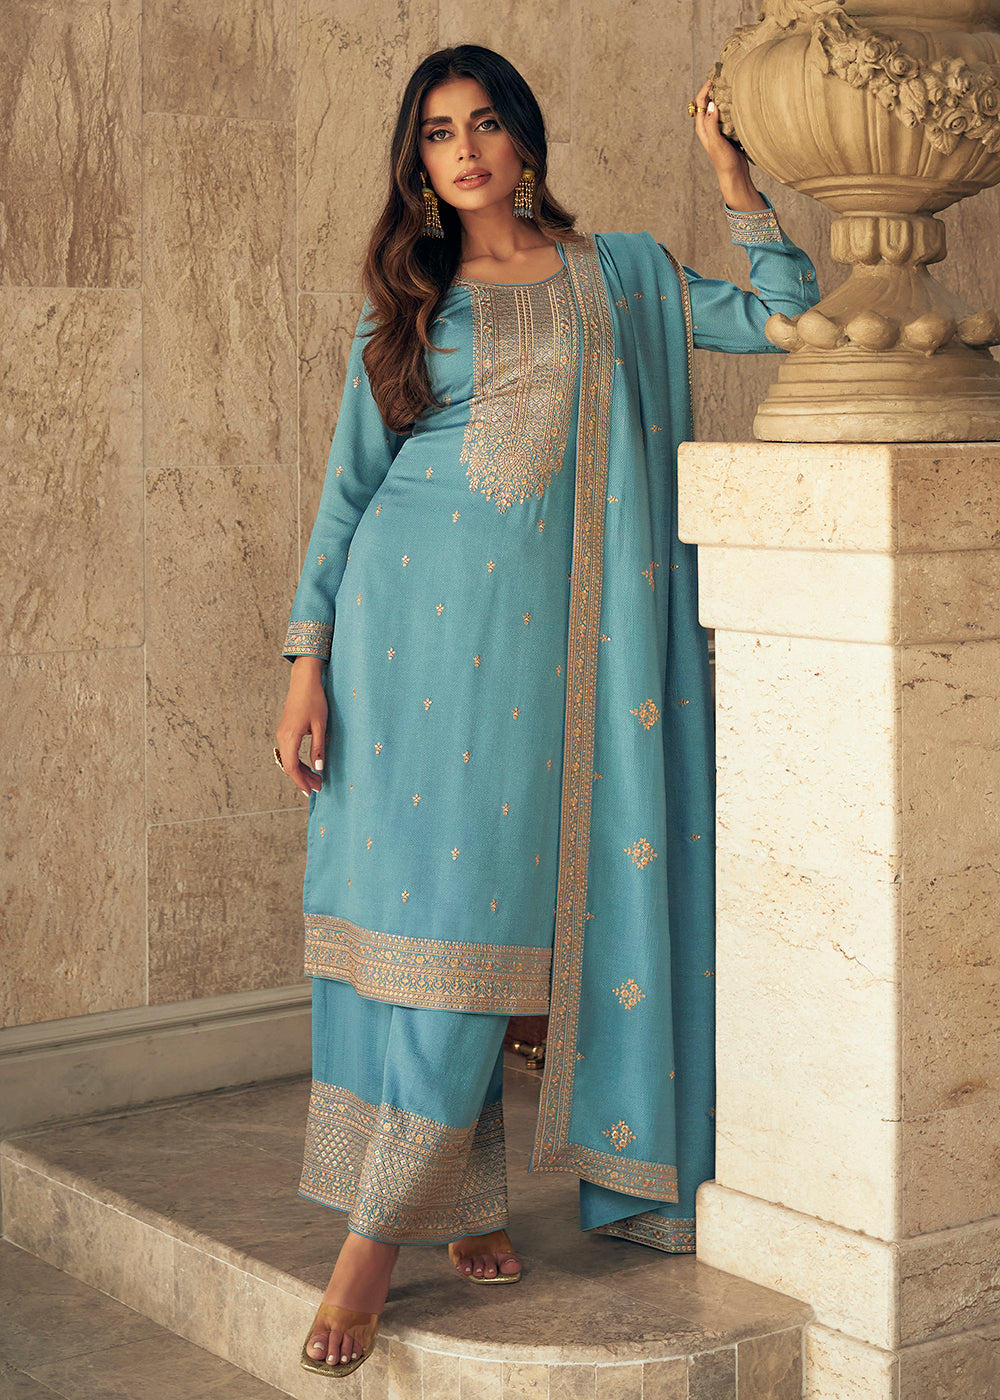 Buy Now Art Silk Stunning Sky Blue Embroidered Festive Palazzo Suit Online in USA, UK, Canada, Germany, Australia & Worldwide at Empress Clothing.